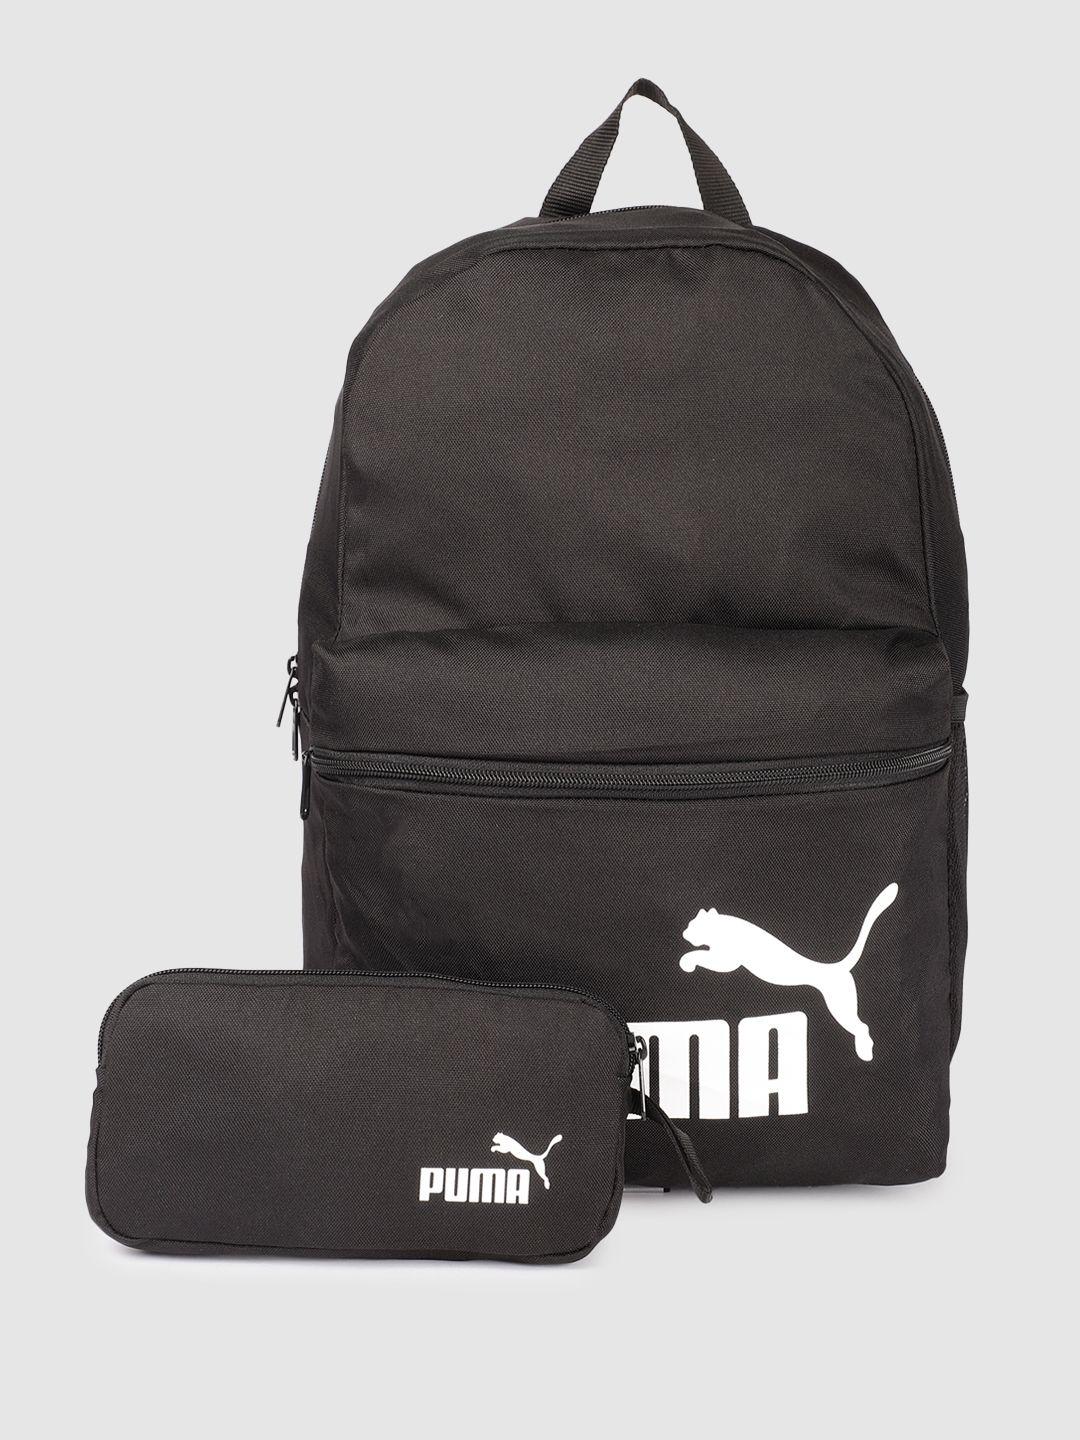 Puma Unisex Brand Logo Printed Phase Backpack with Zip Pouch